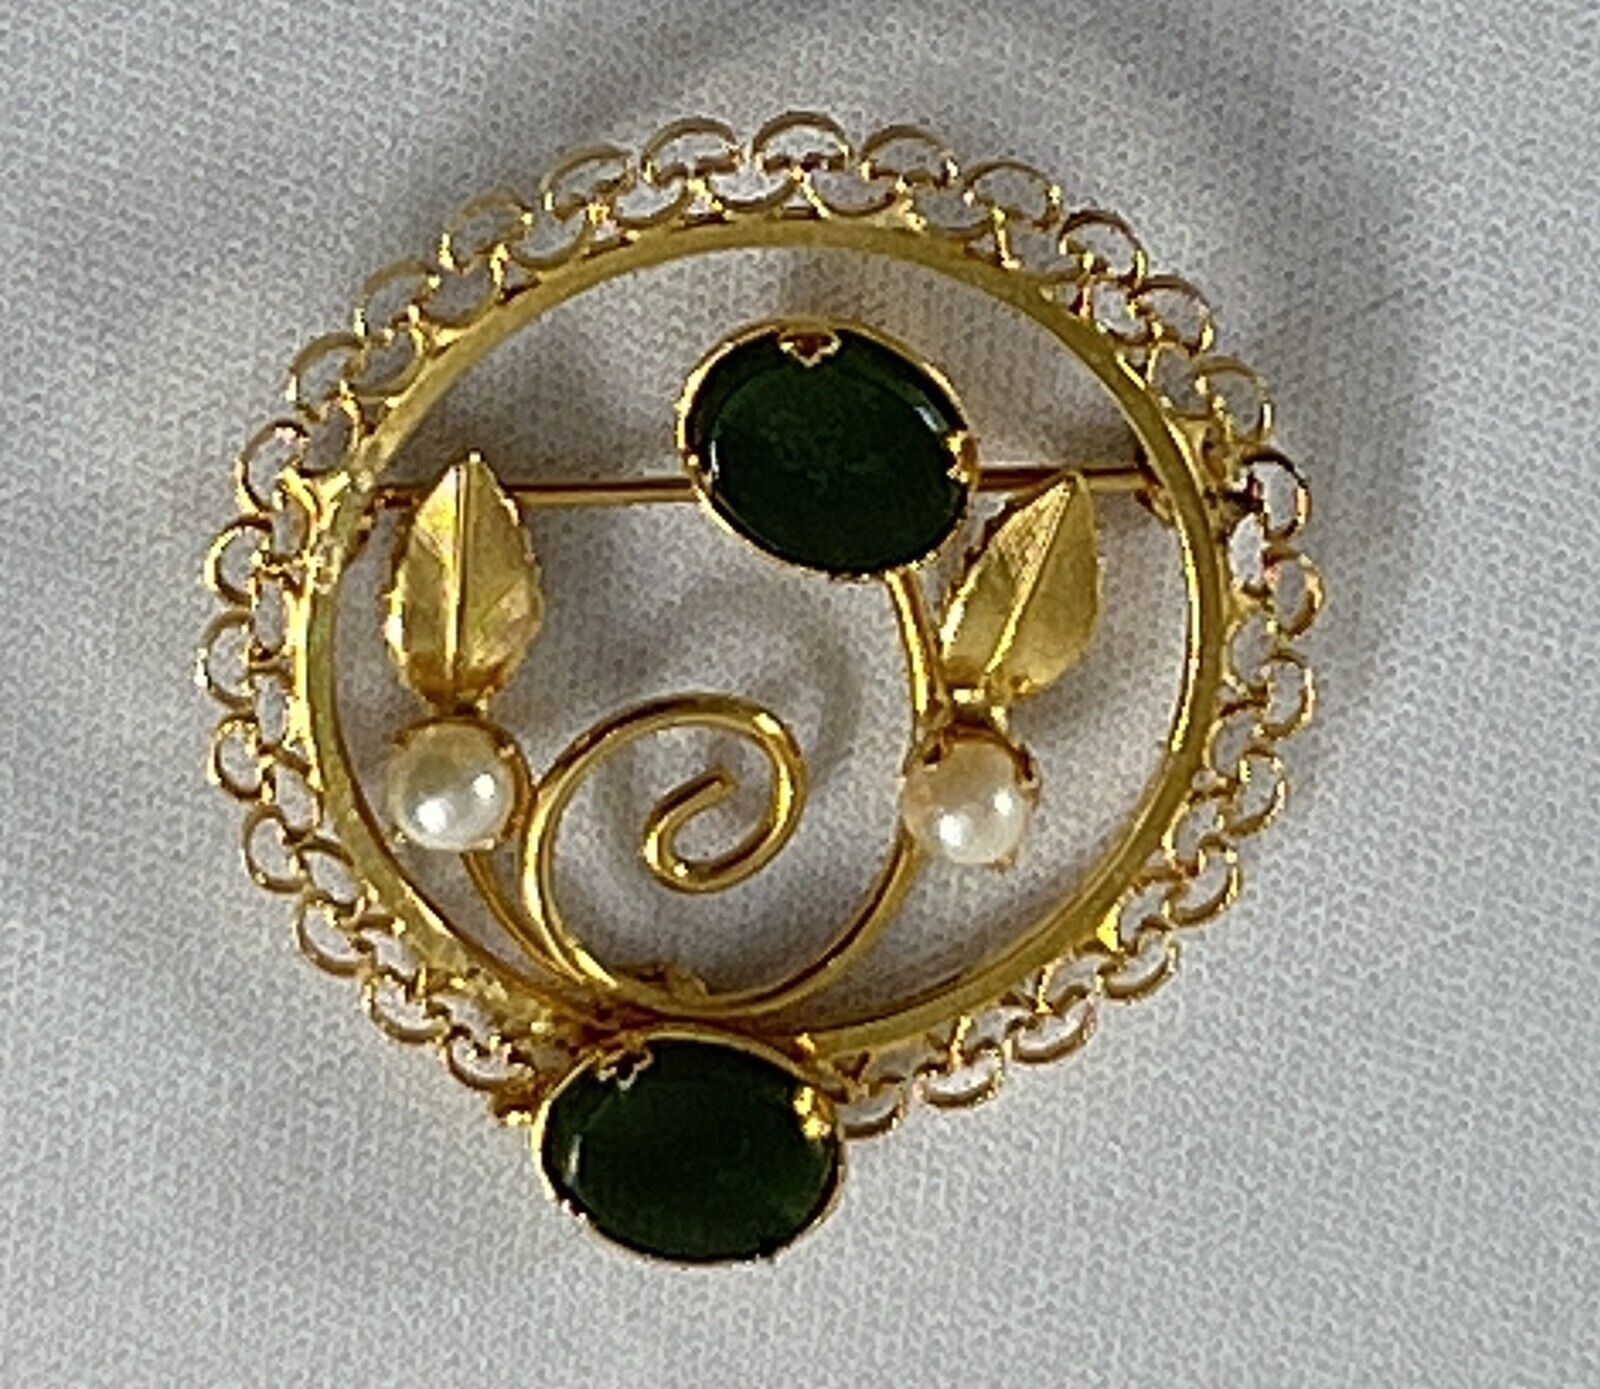 Primary image for Vintage Gold Filled Brooch Pin Faux Pearl Faux Jade Round 1.5" Across Wreath